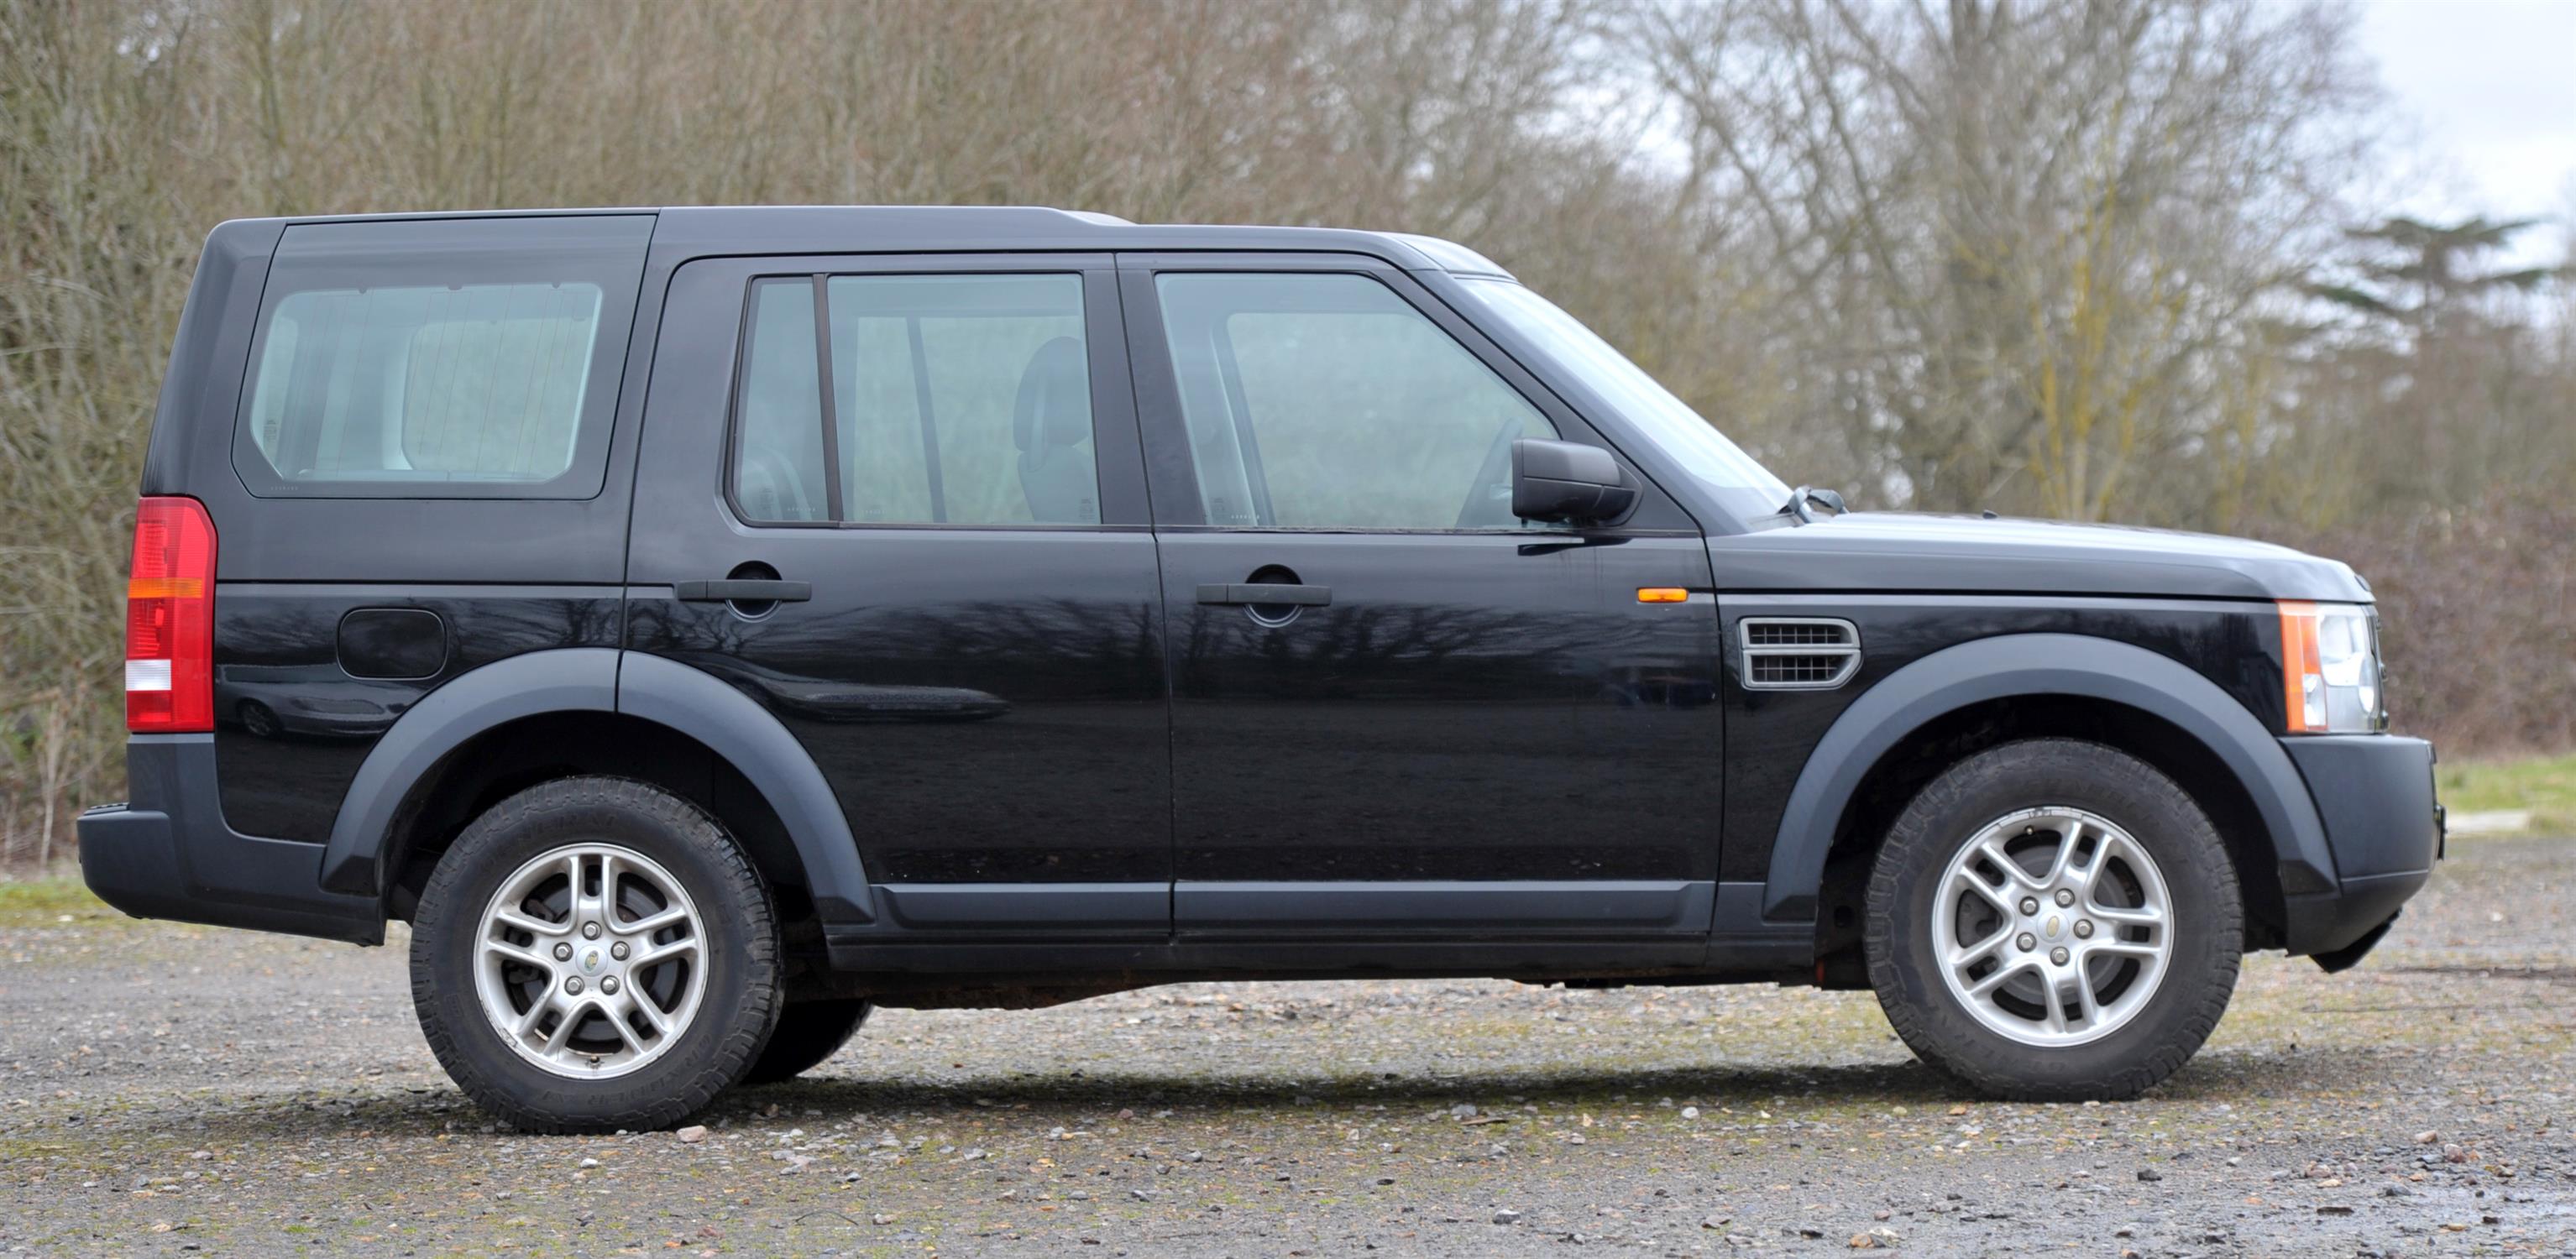 Land Rover Discovery 3 TDV6 Diesel 6 Speed Manual. Registration number: FP06 LAA. Mileage: 125,360. - Image 3 of 12